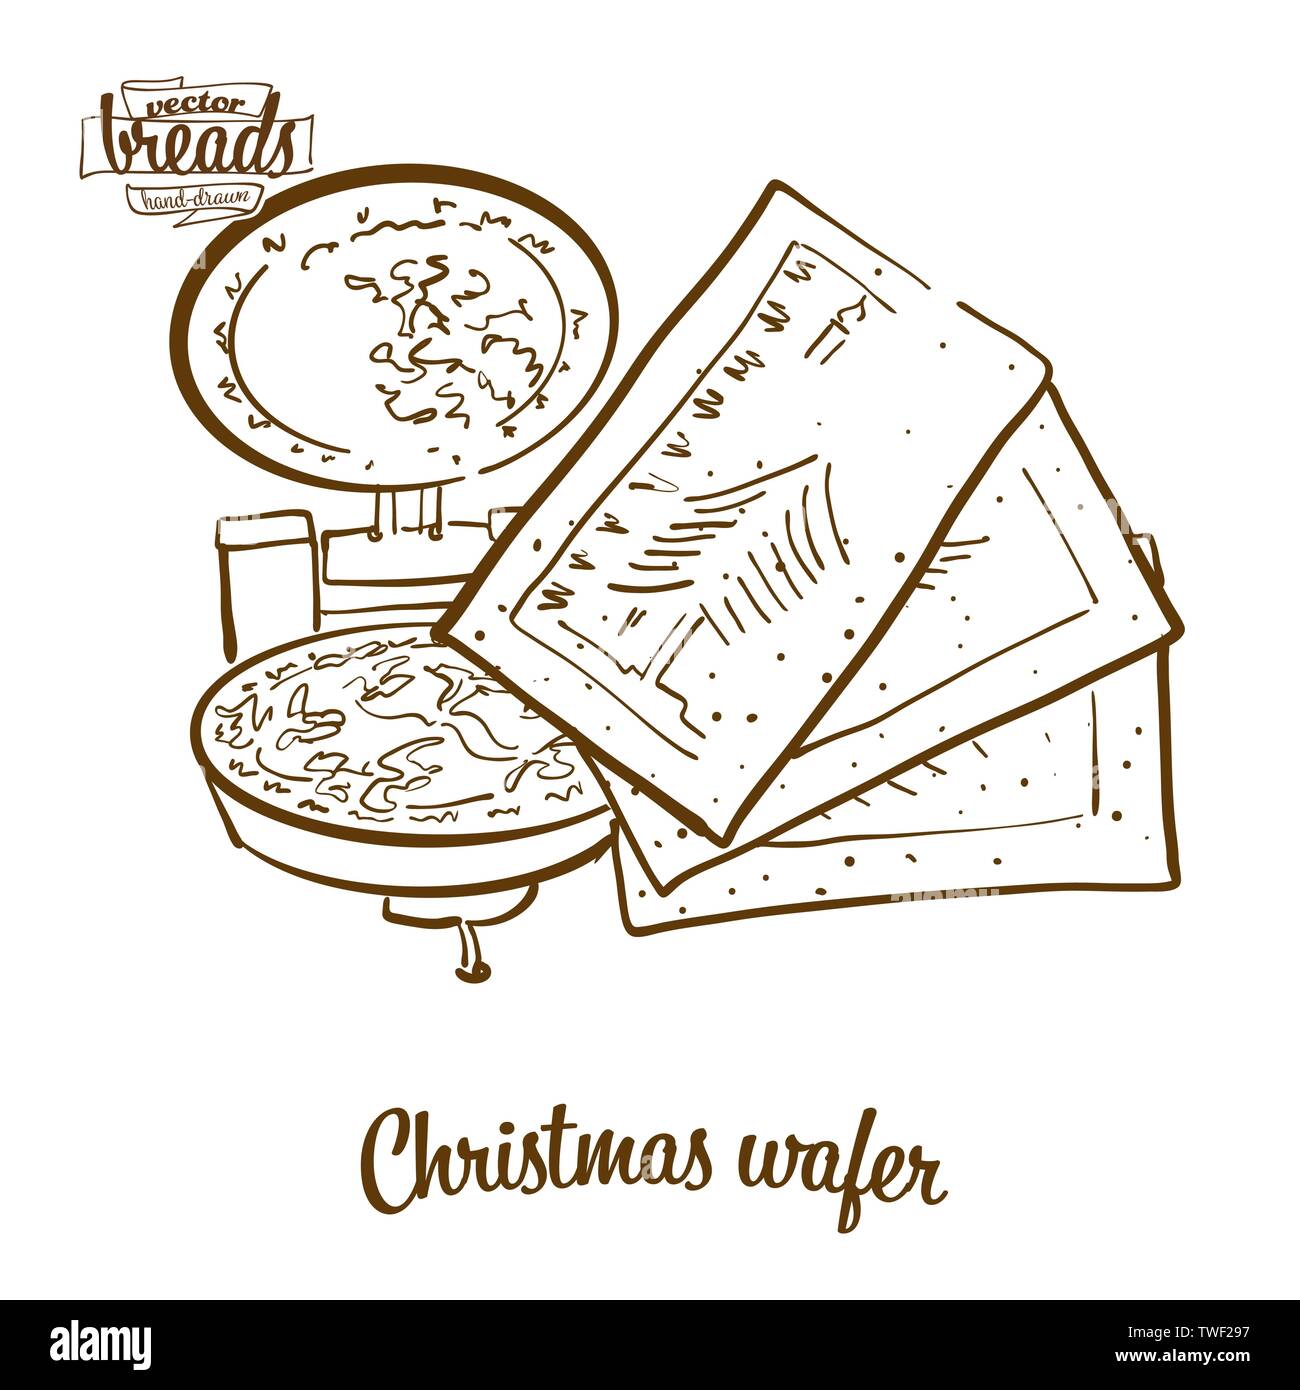 Christmas wafer bread vector drawing. Food sketch of Crispy bread, usually known in Eastern Europe. Bakery illustration series. Stock Vector